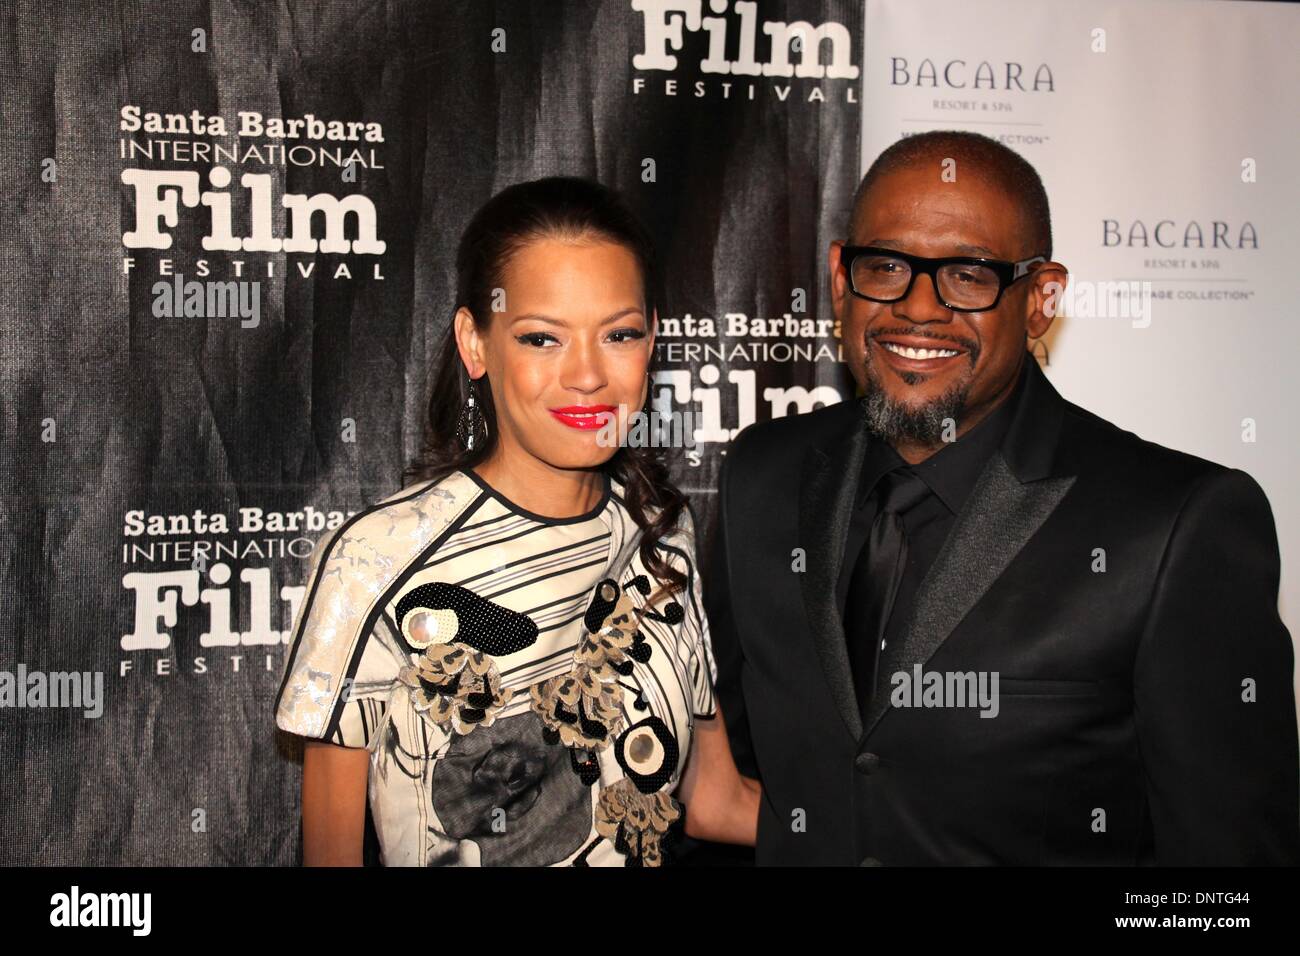 Santa Barbara, California USA – 5th January 2014. The red carpet arrivals for the Santa Barbara International Film Festival’s Kirk Douglas Award For Excellence in Film presented to Forest Whitaker at a black tie gala held at the Bacara Resort & Spa. Photo: Forest Whitaker with his wife Keisha. Credit: Lisa Werner/Alamy Live News Stock Photo